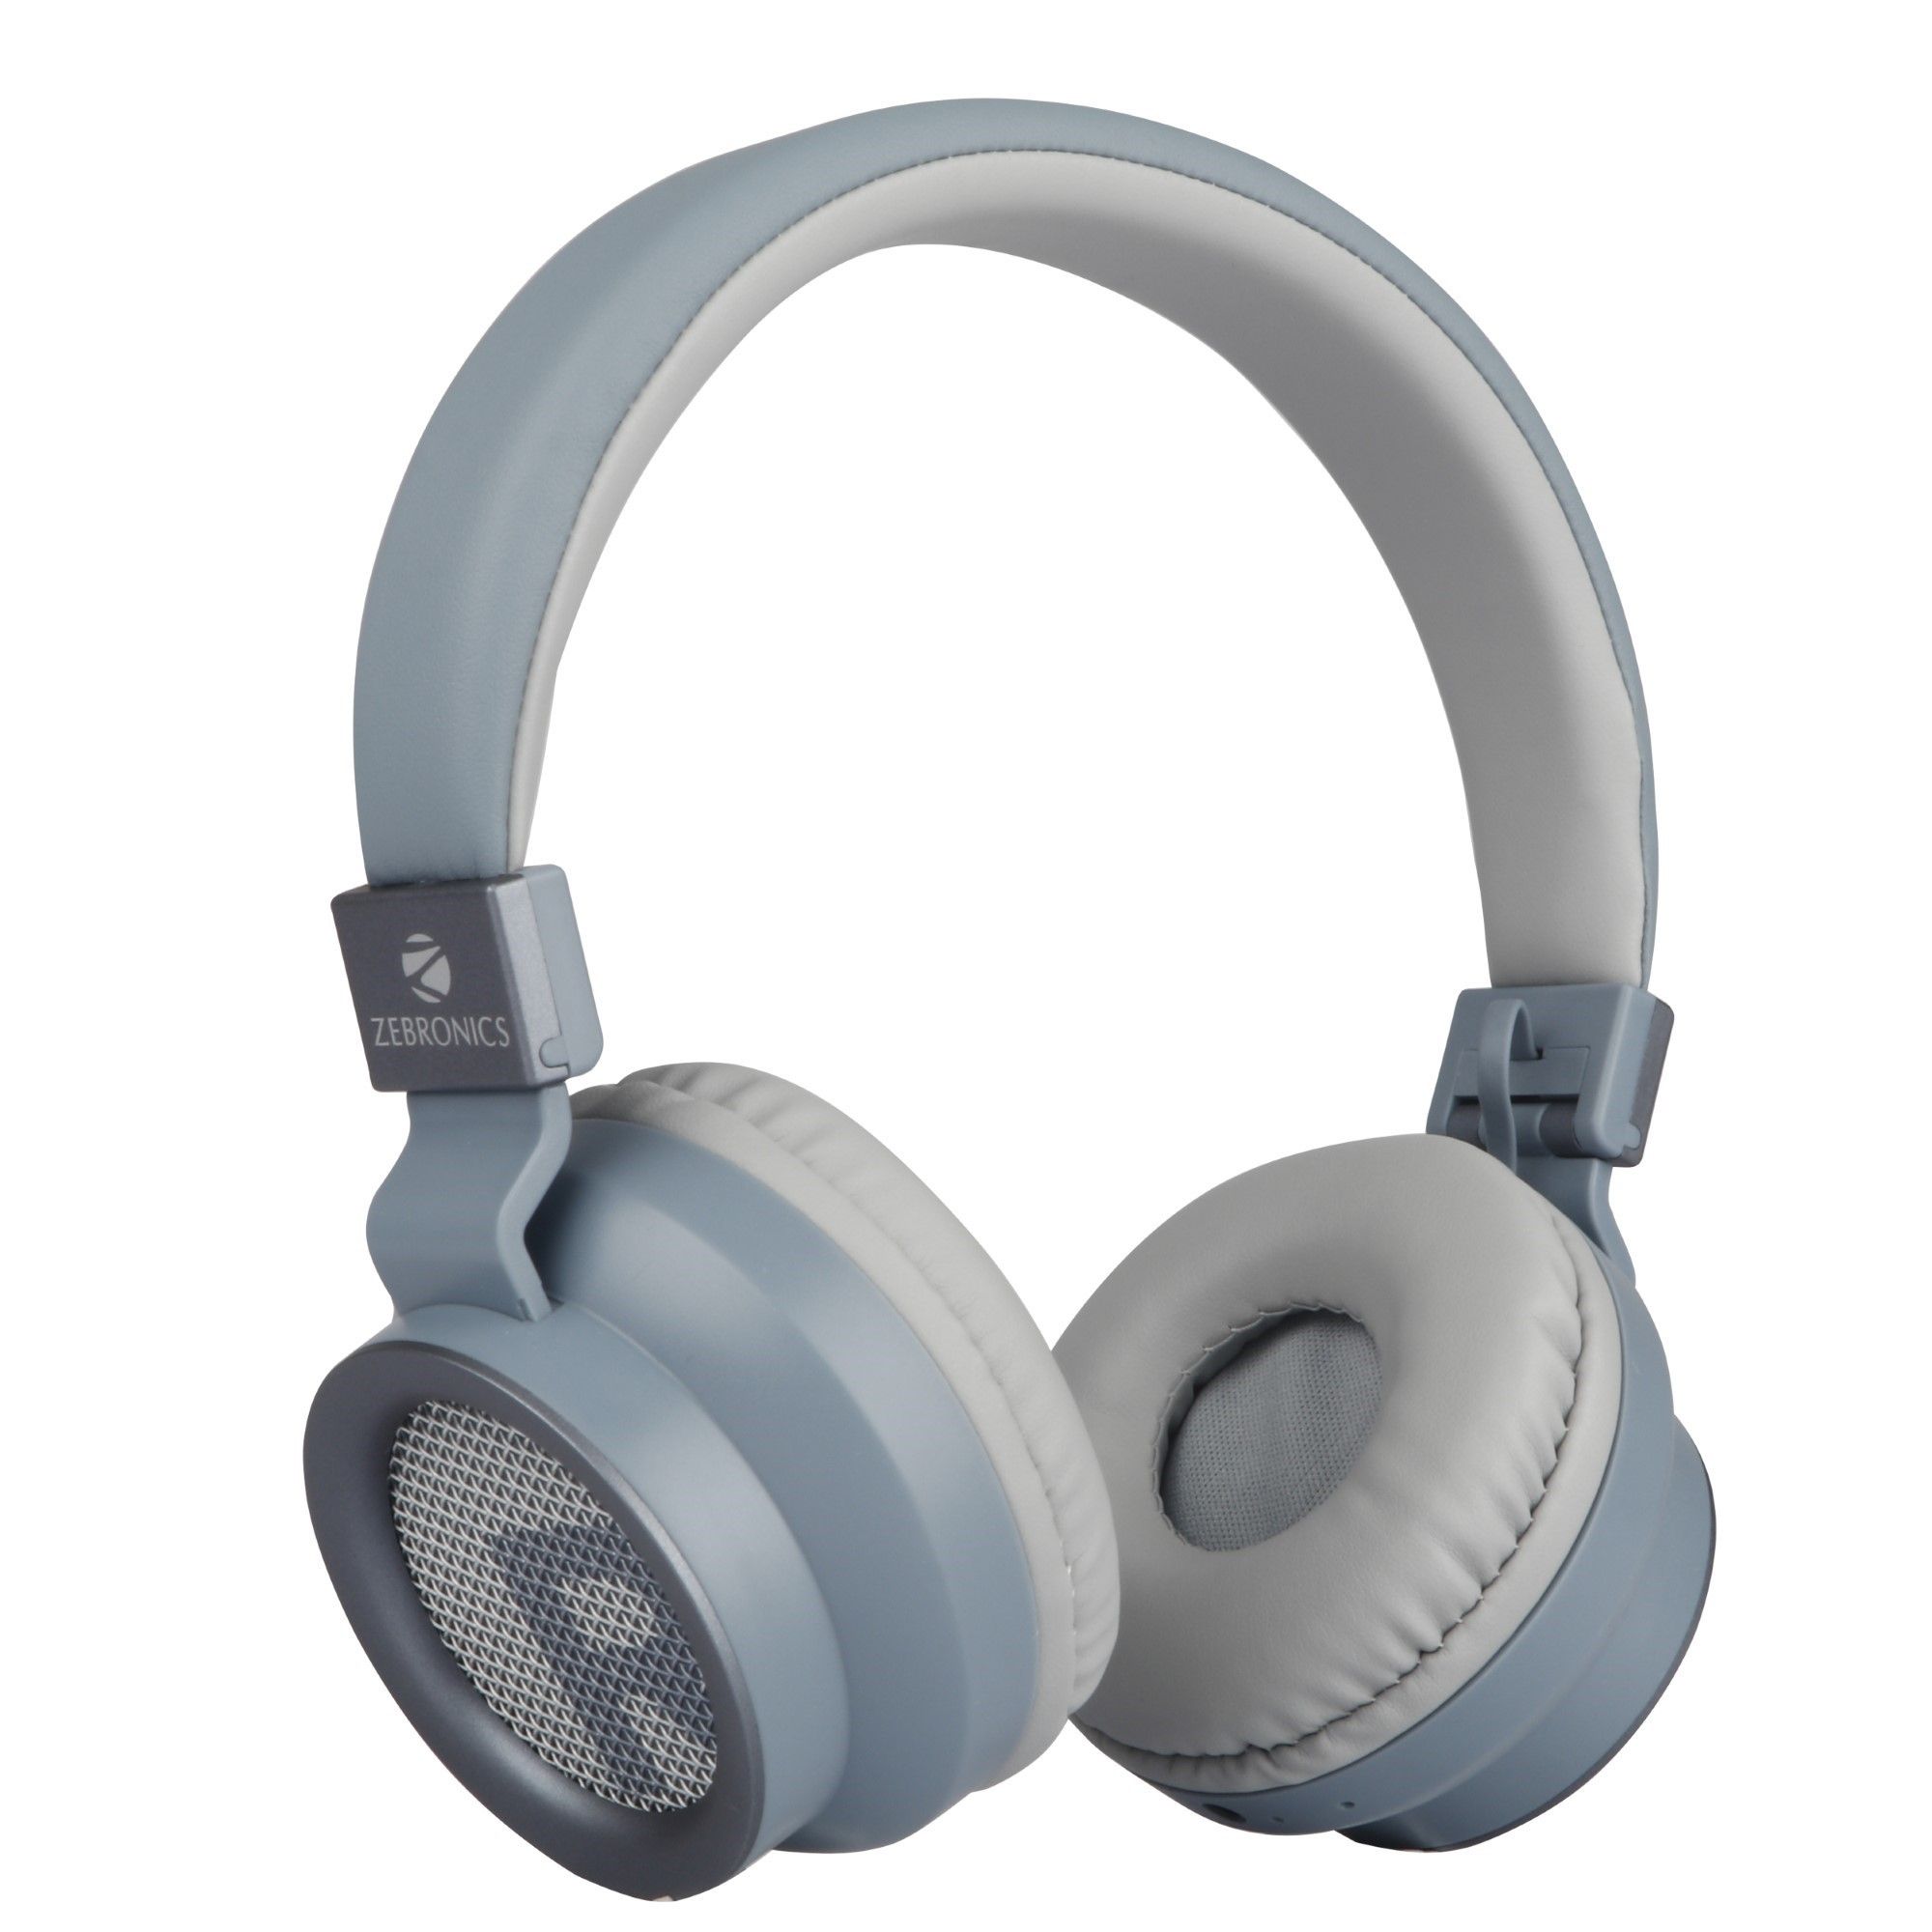 Zebronics Zeb-Bang Wireless Bluetooth Headphone 16Hr Playback time&Supports Voice Assistant (grey)